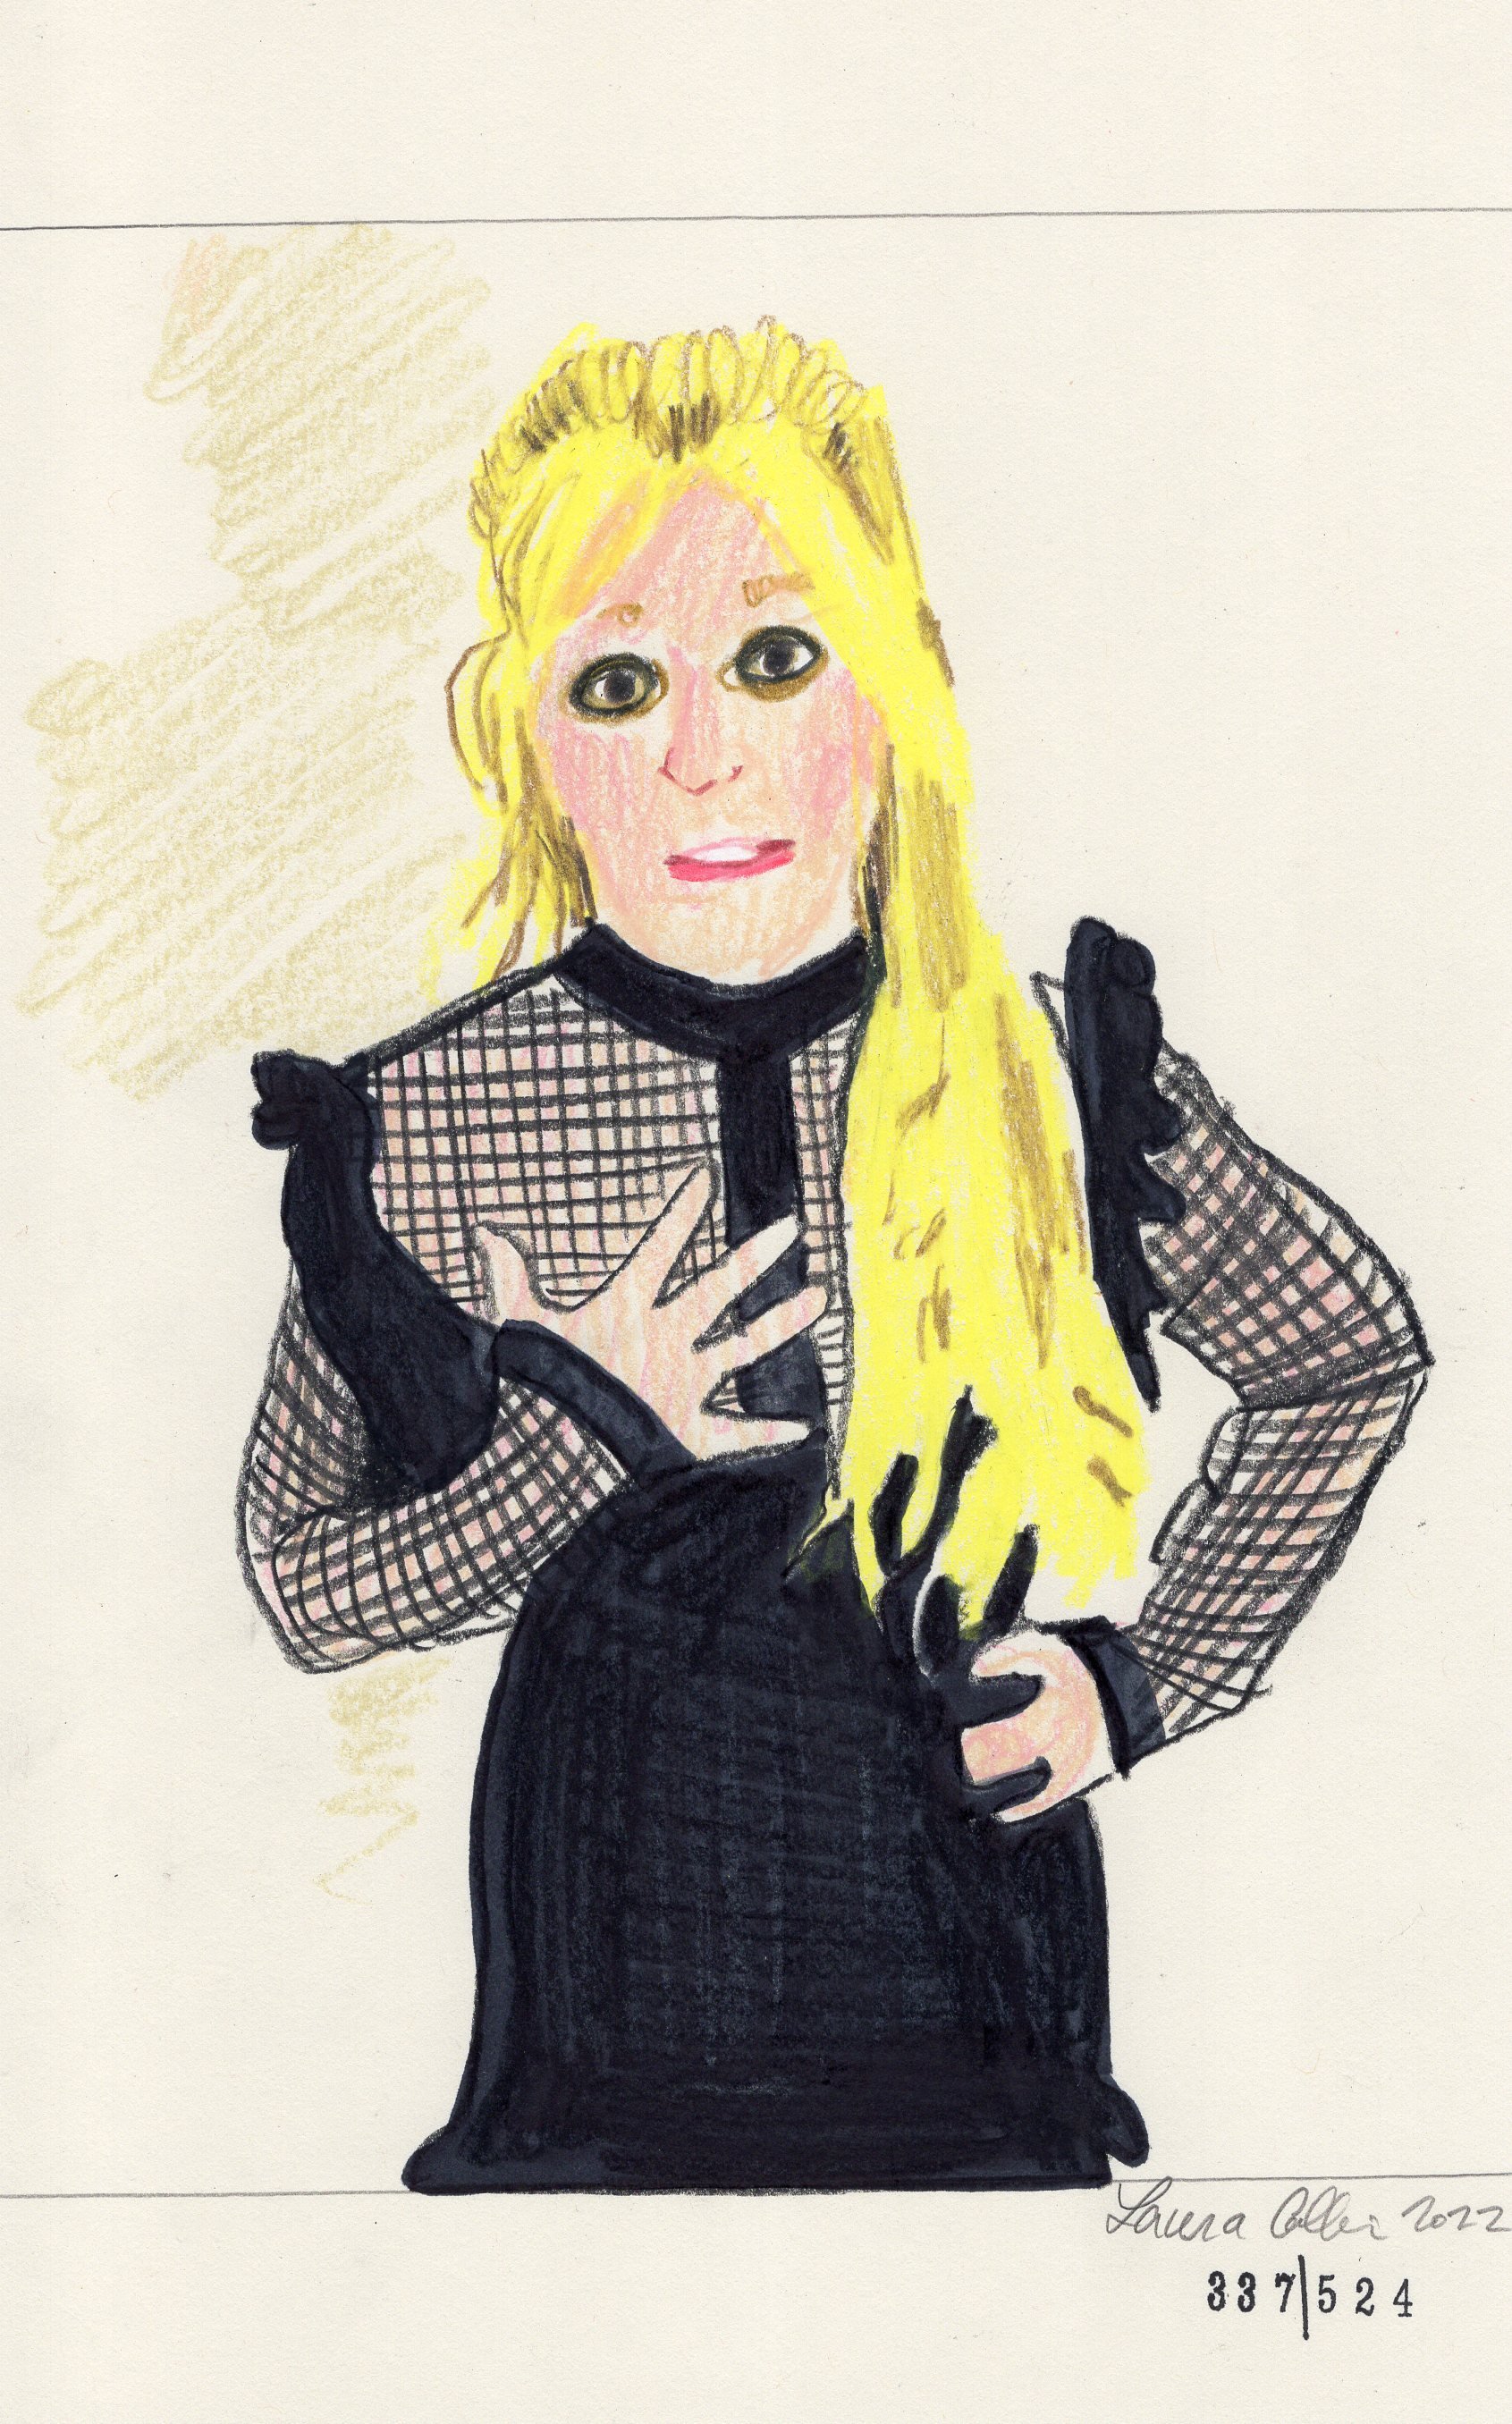 Laura Collins Britney Spears Animation 6x9in mixed media 2022 no337.jpg